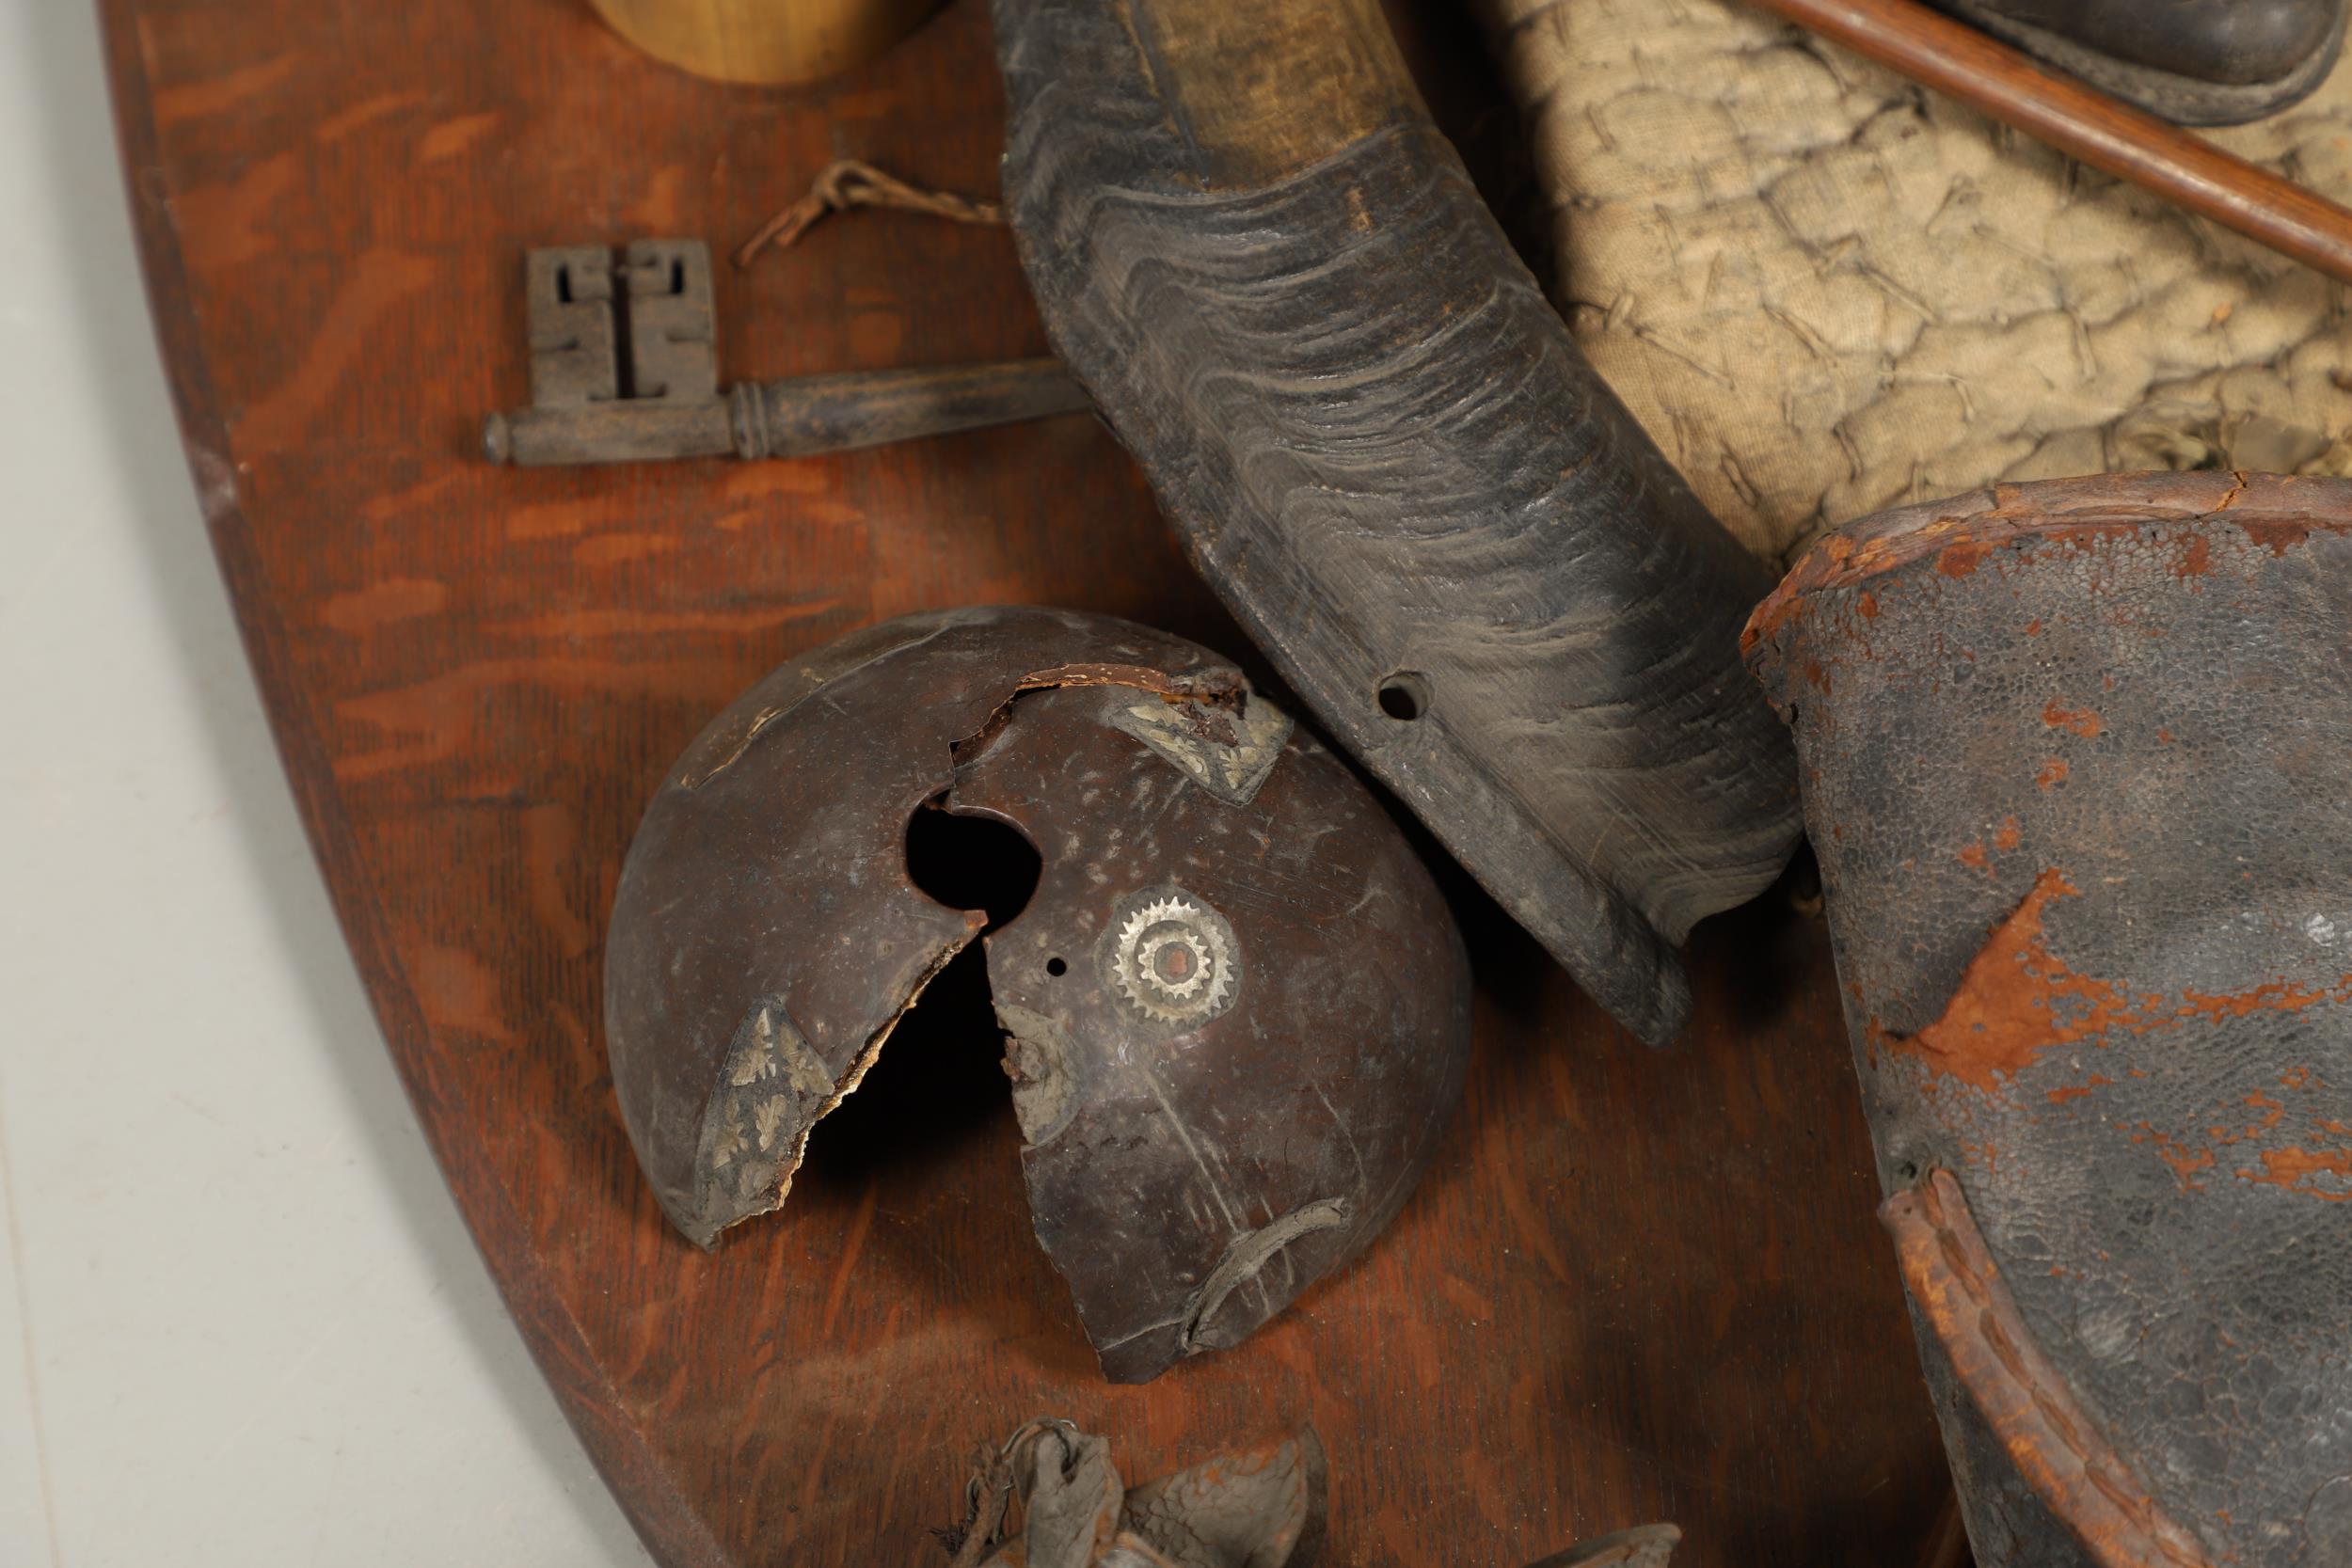 AN UNUSUAL OAK SHIELD MOUNTED WITH MILITARY TROPHIES, CURIOSITIES AND OTHER ITEMS. - Image 5 of 15